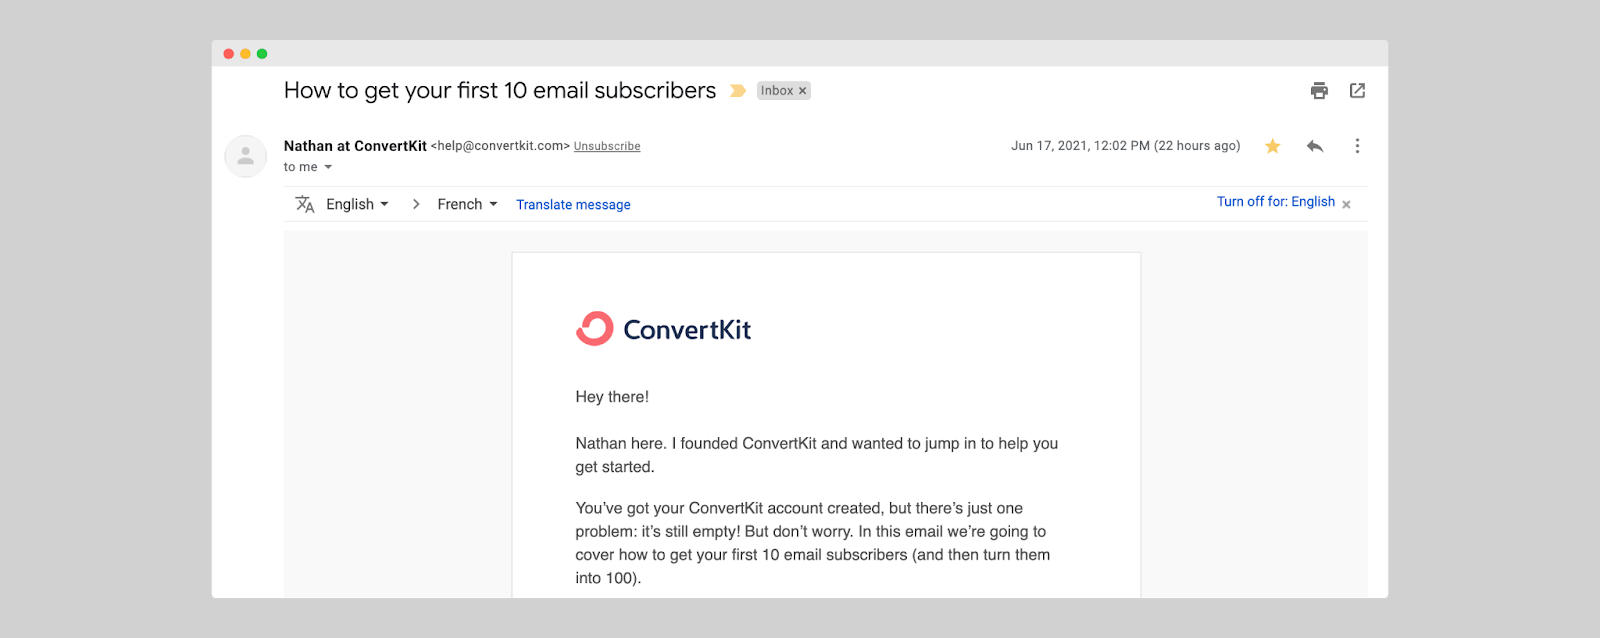 Email marketing strategy: ConvertKit's teaching email